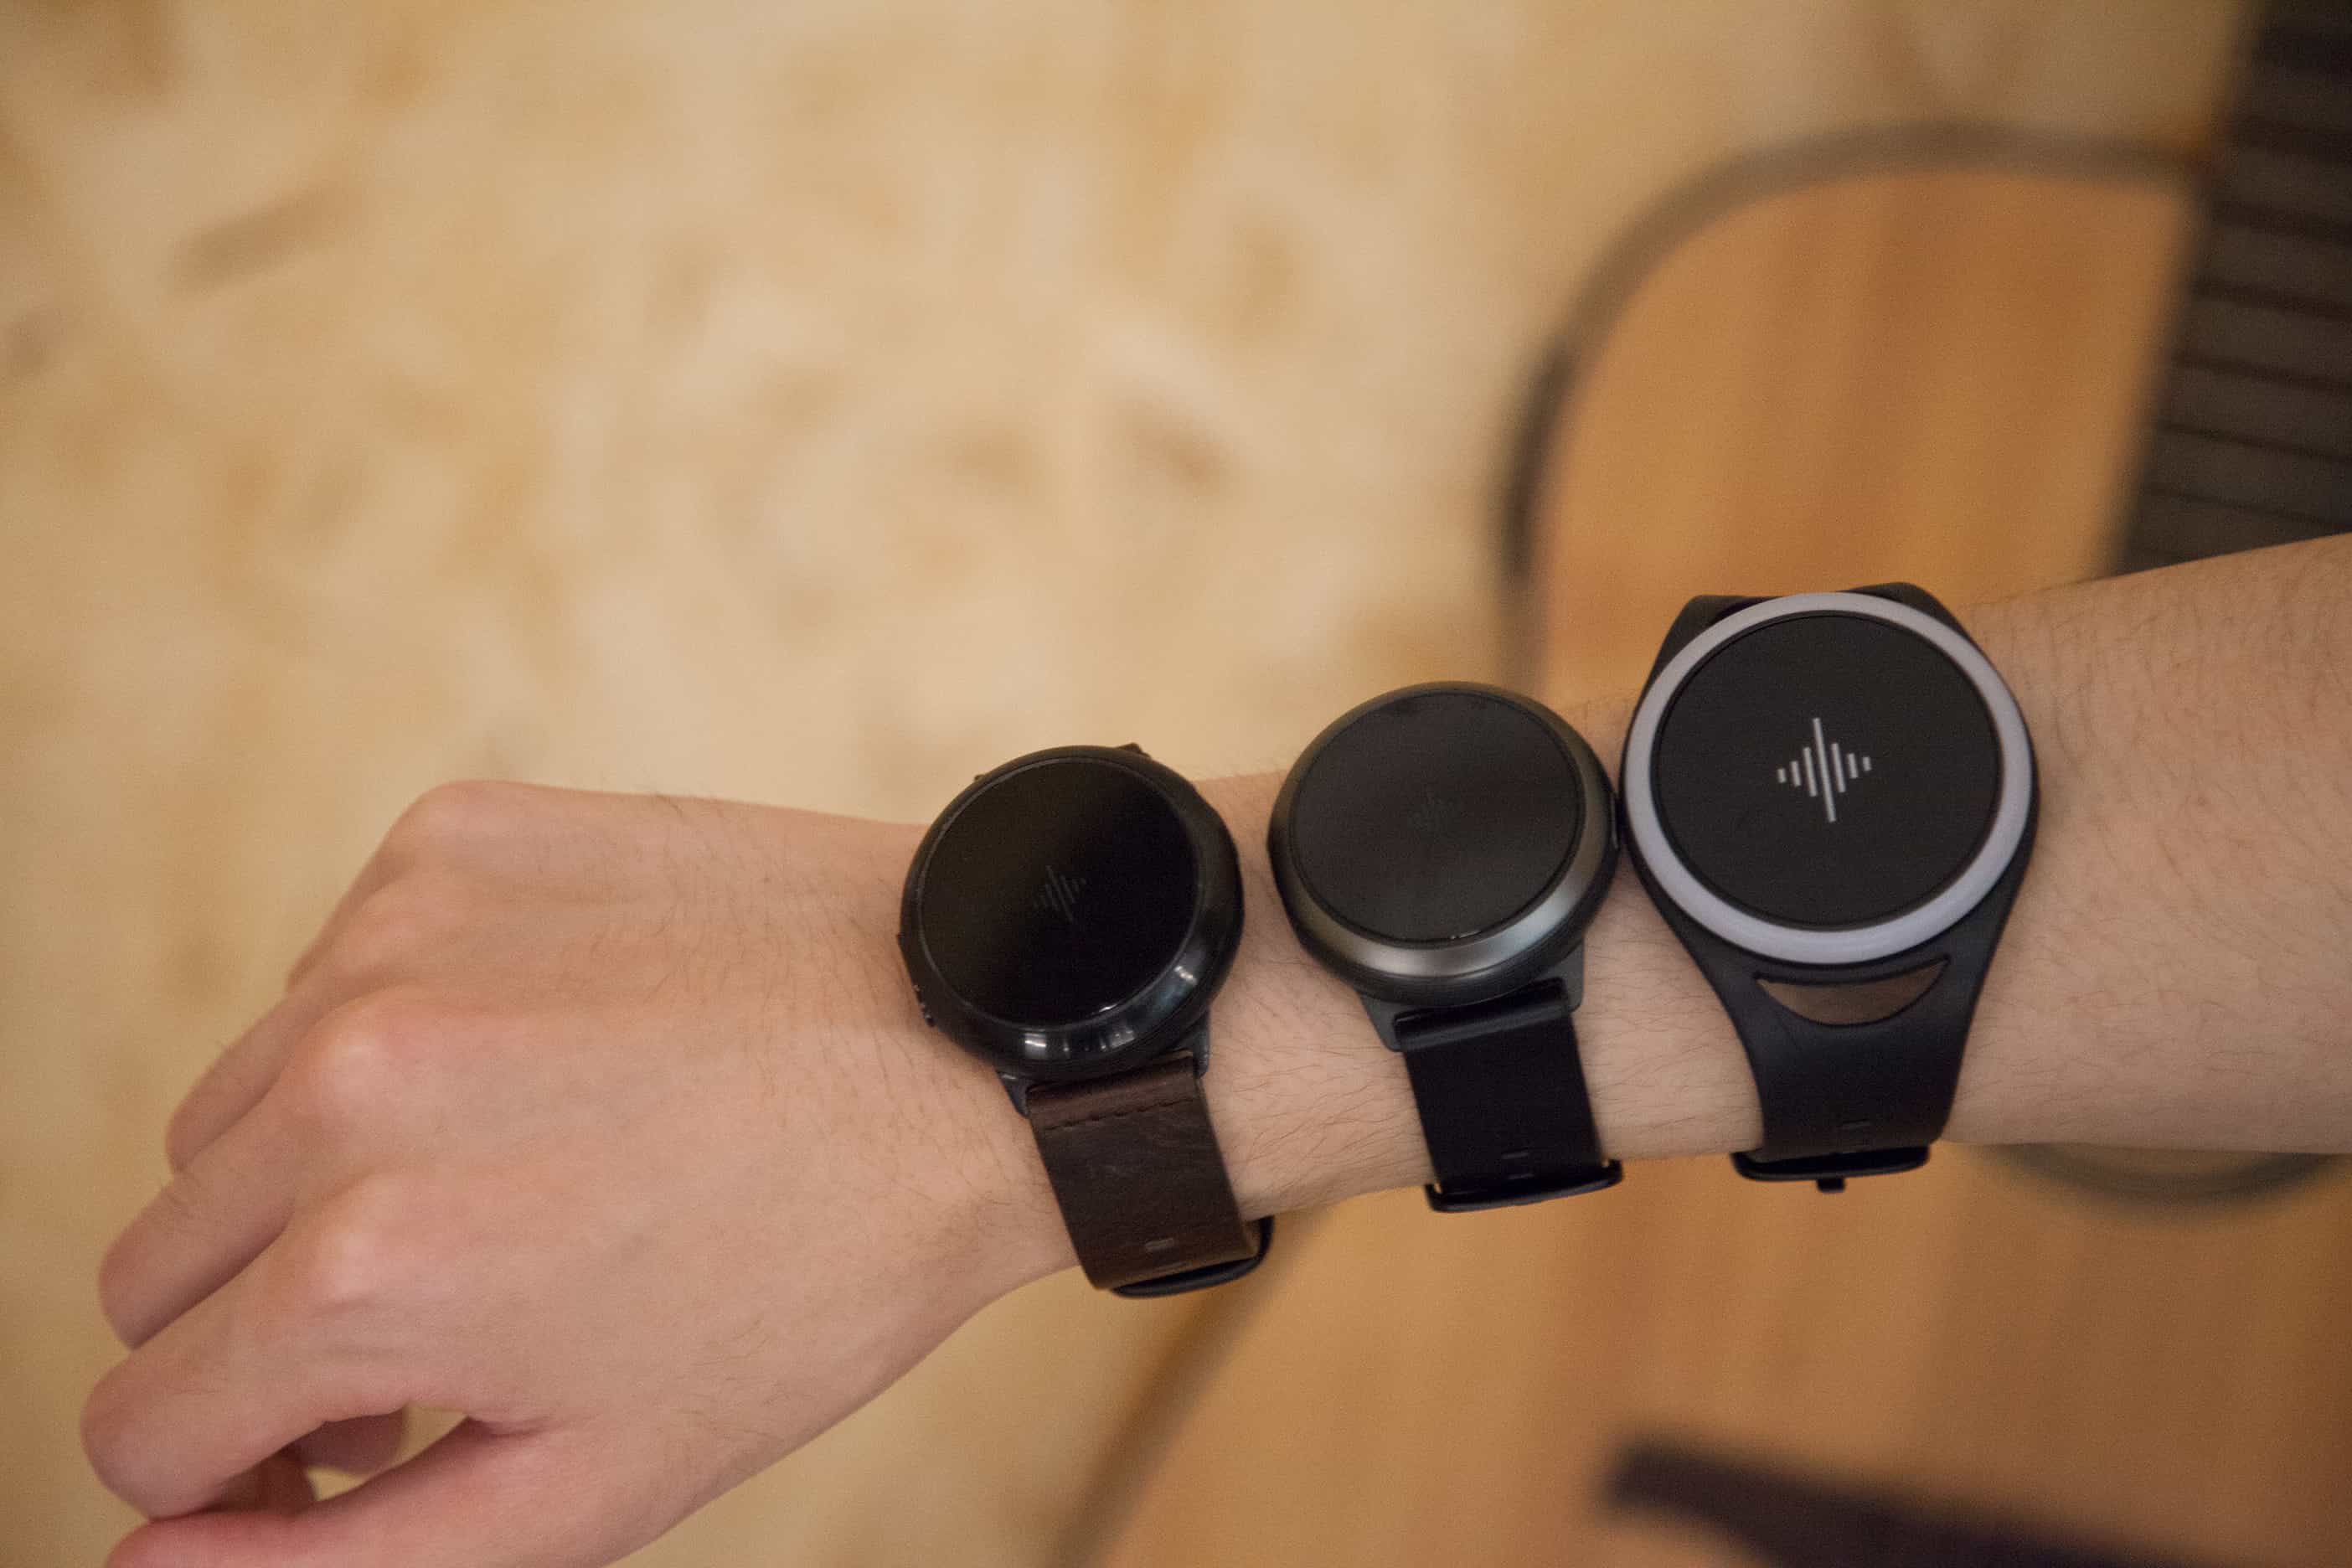 Soundbrenner core and pulse on hand